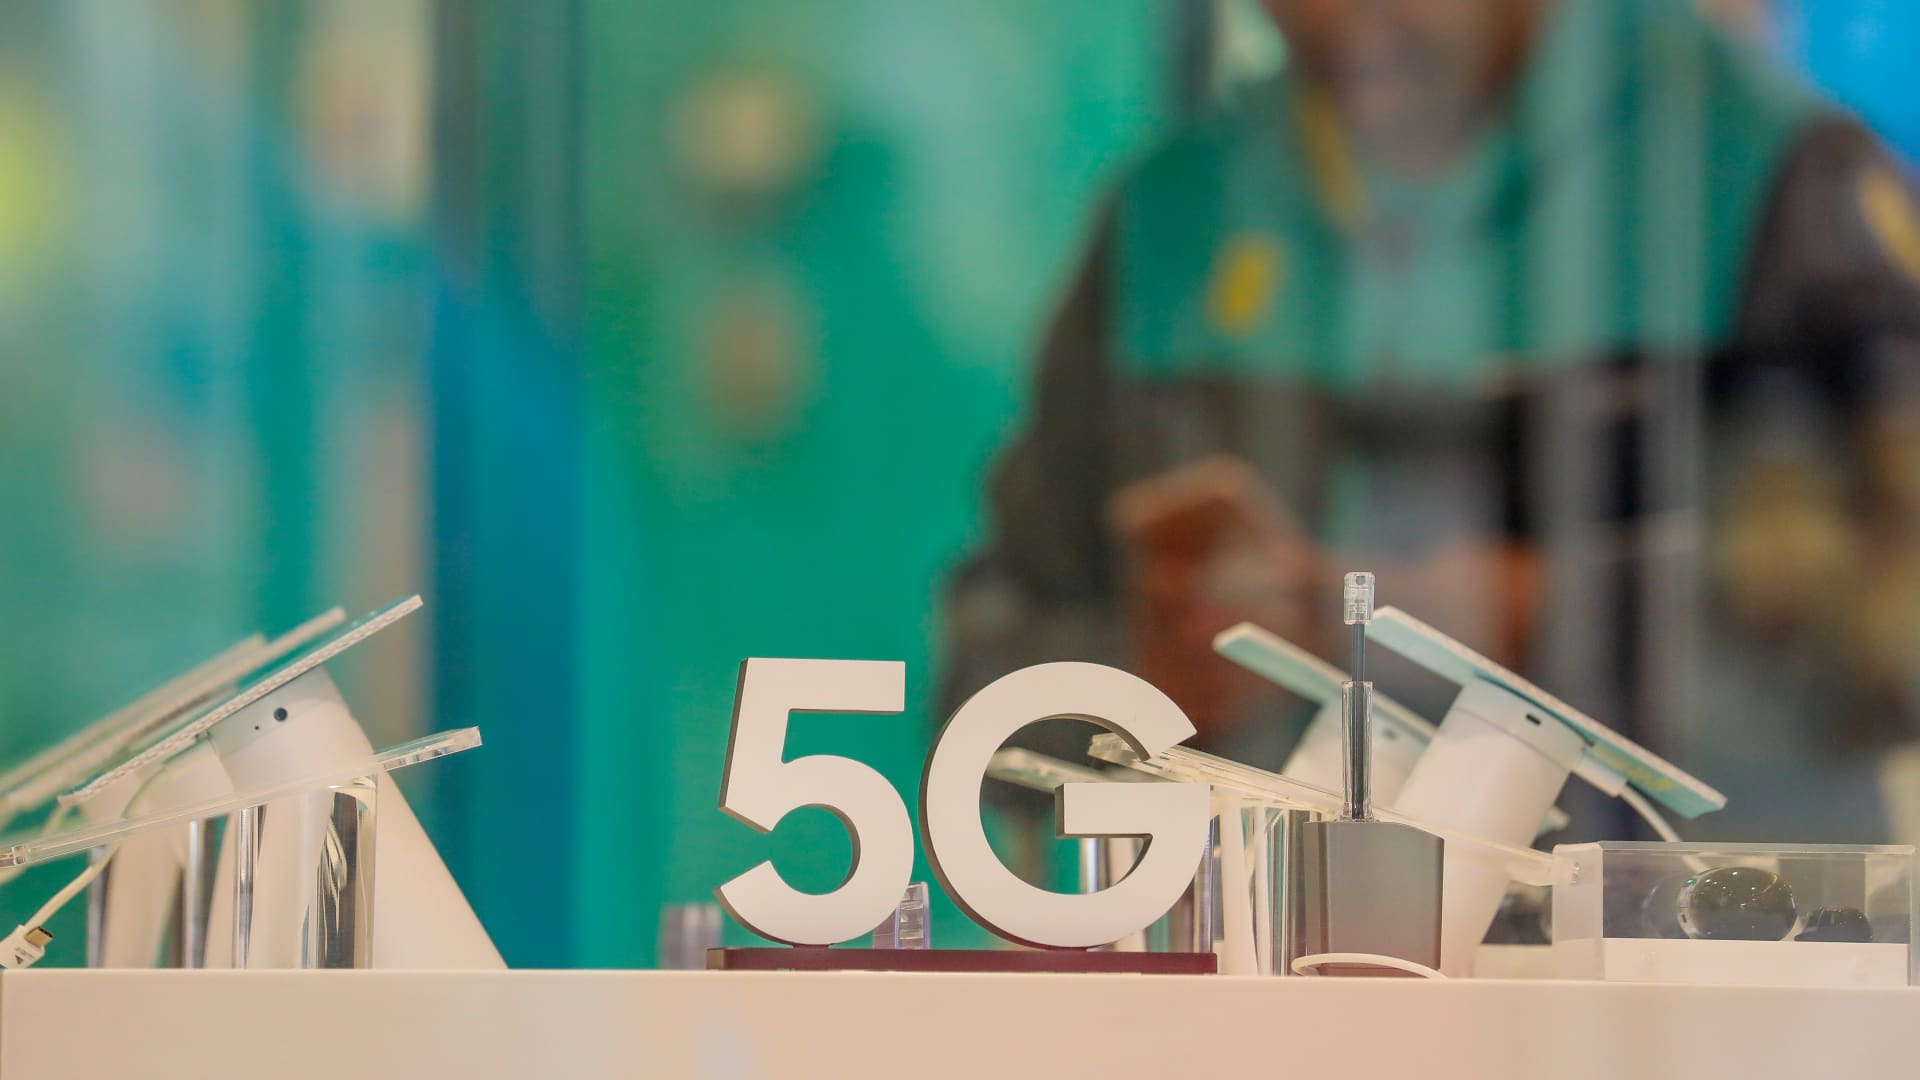 British telco giant BT expects to launch 5G standalone — or 'true' 5G — later this year